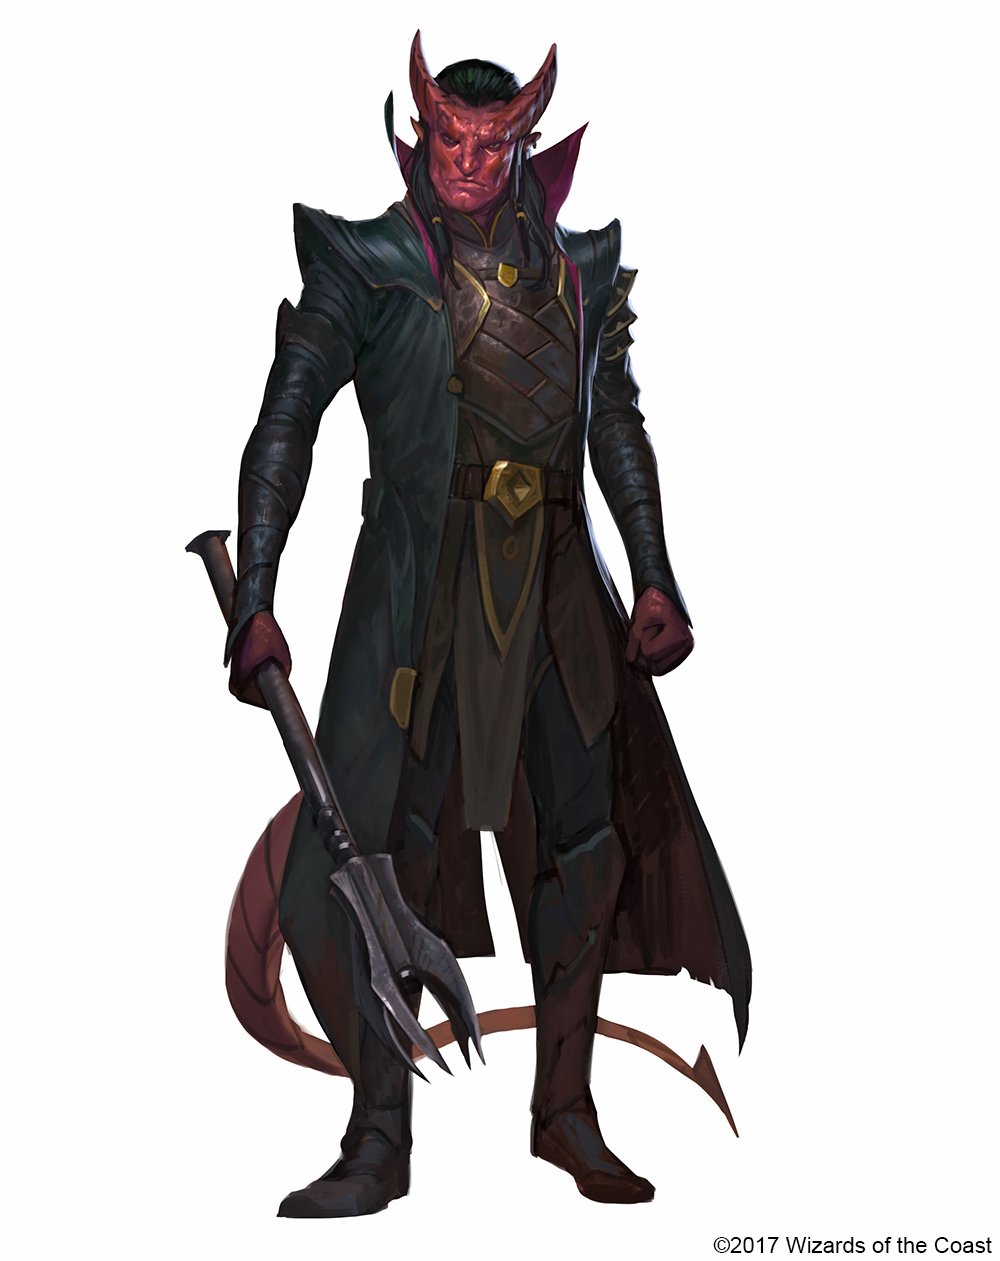 Jetpack7 on Twitter: "D&D Monster of the Day: Tiefling Male (D&...